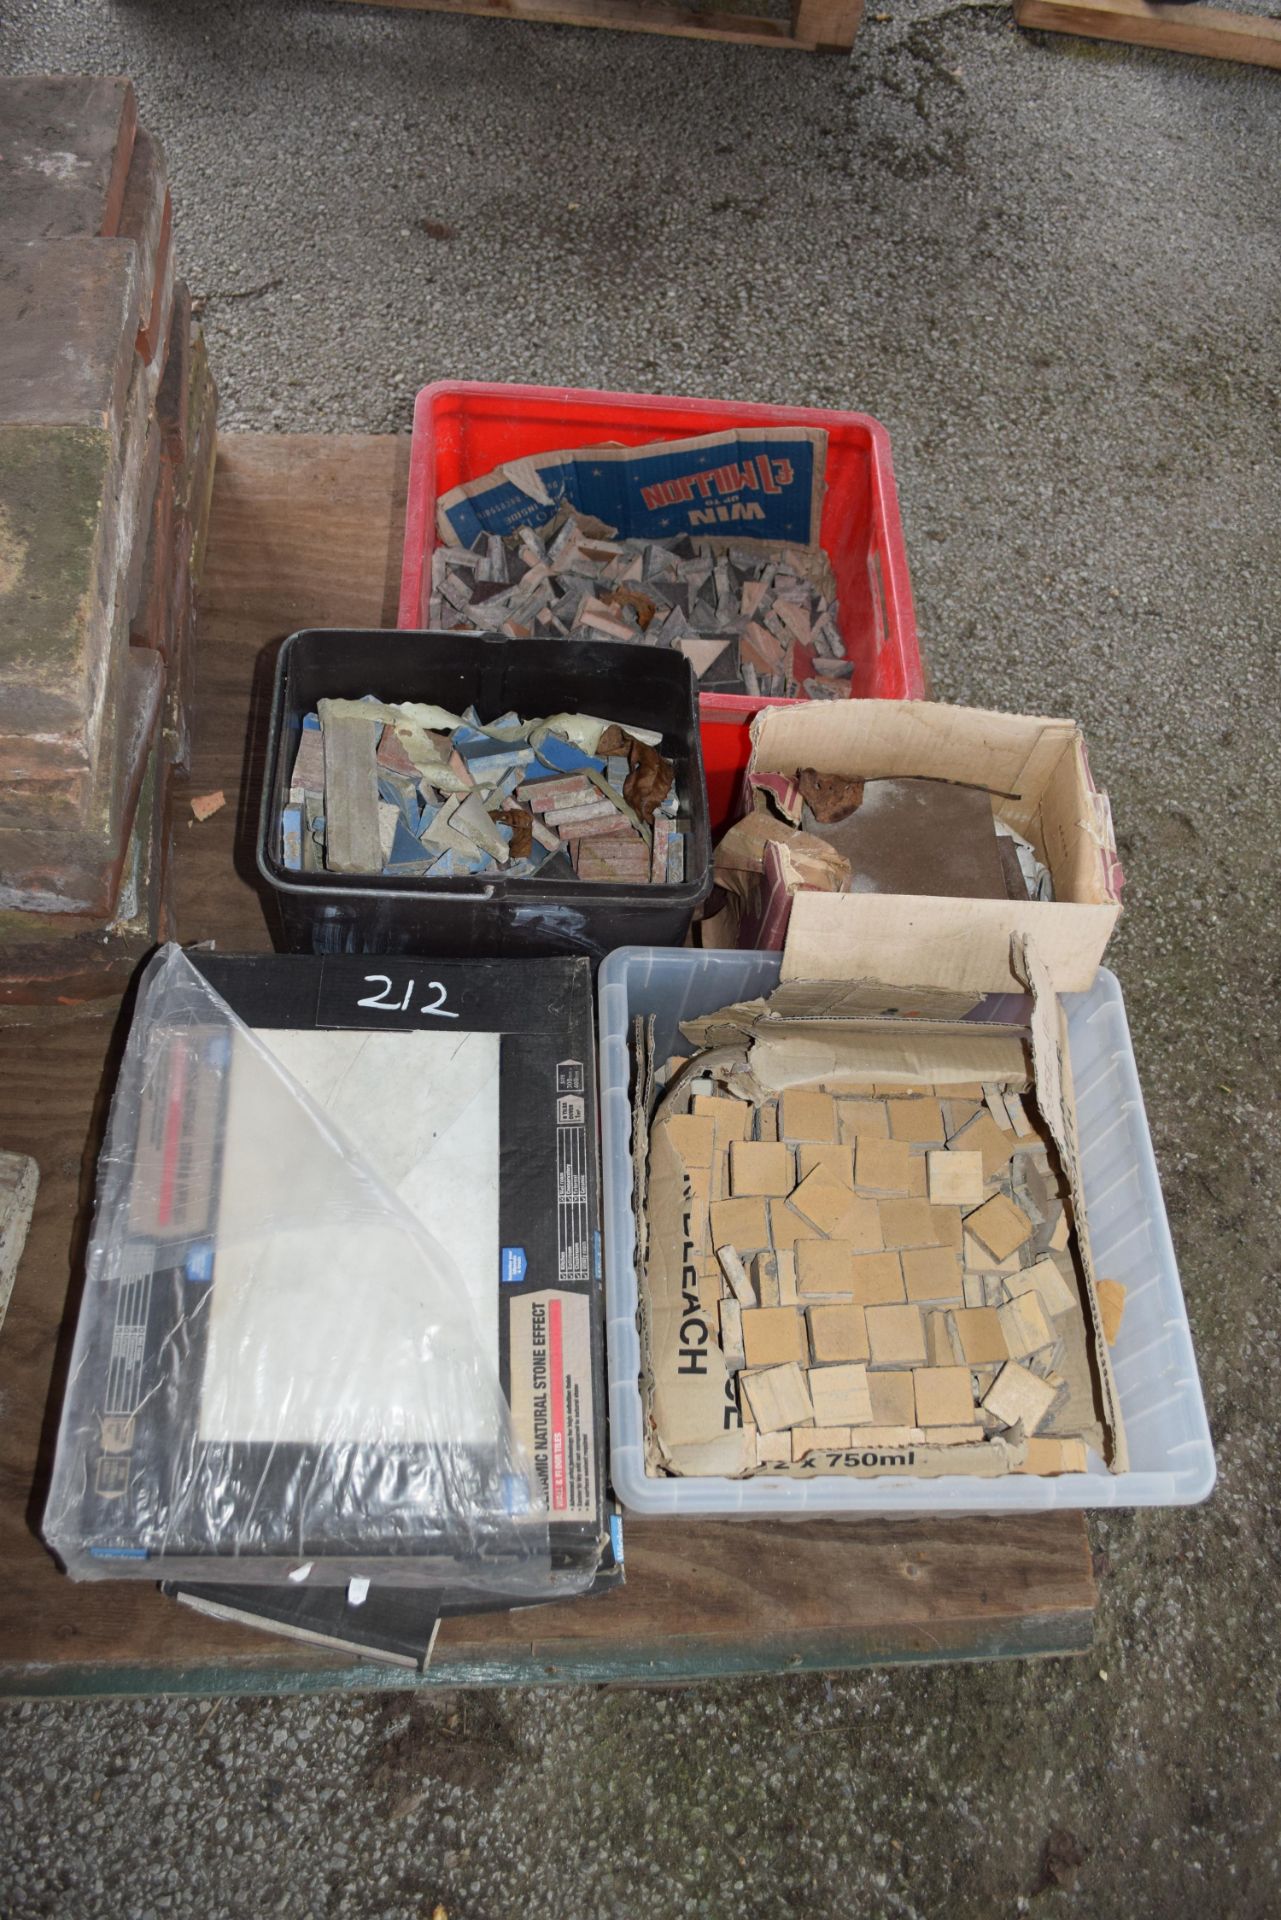 Quantity of tiles and mosaics